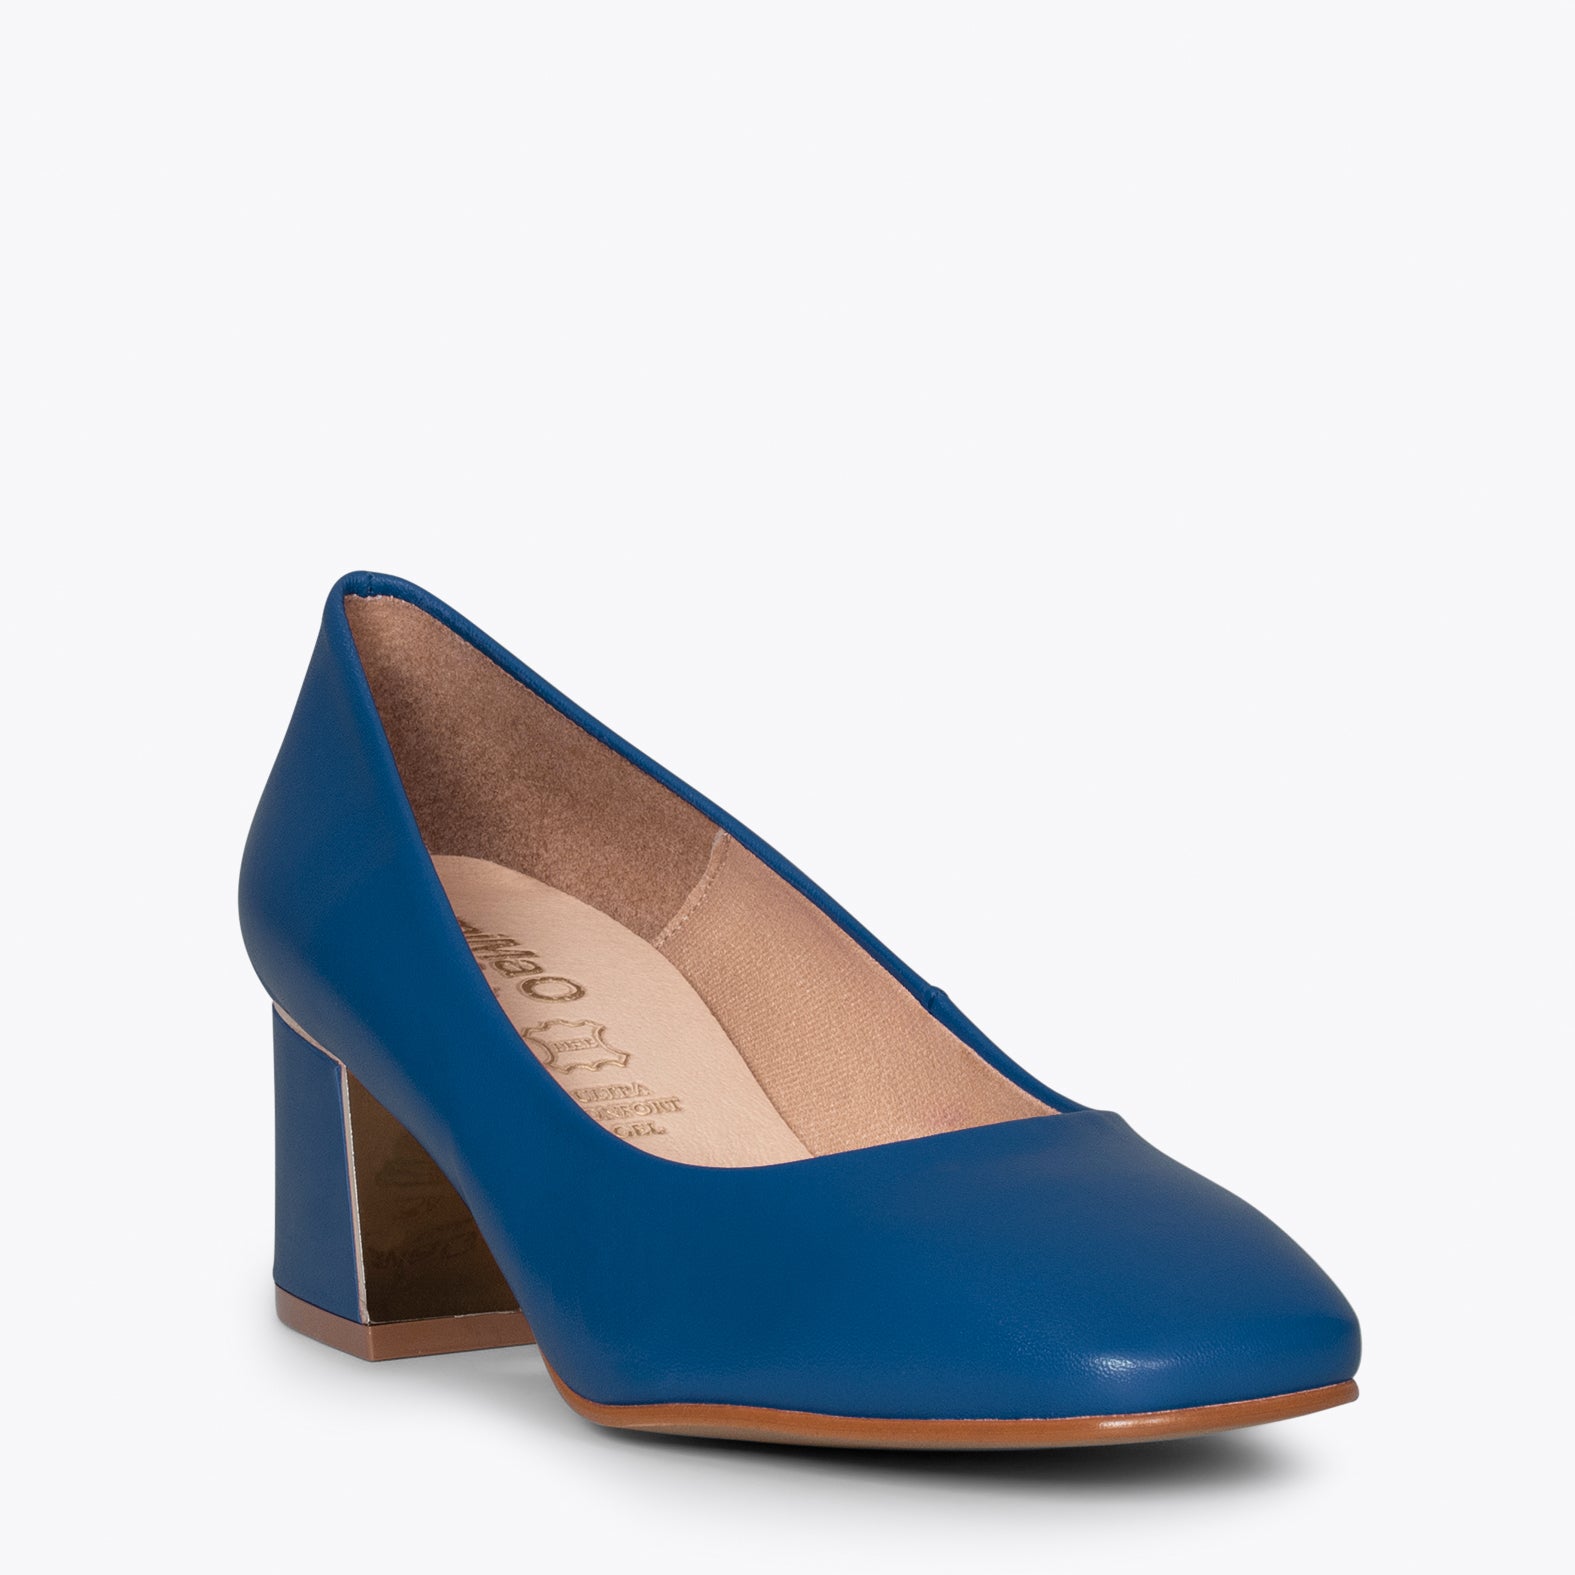 FEMME – NAVY mid heel shoes with square toe